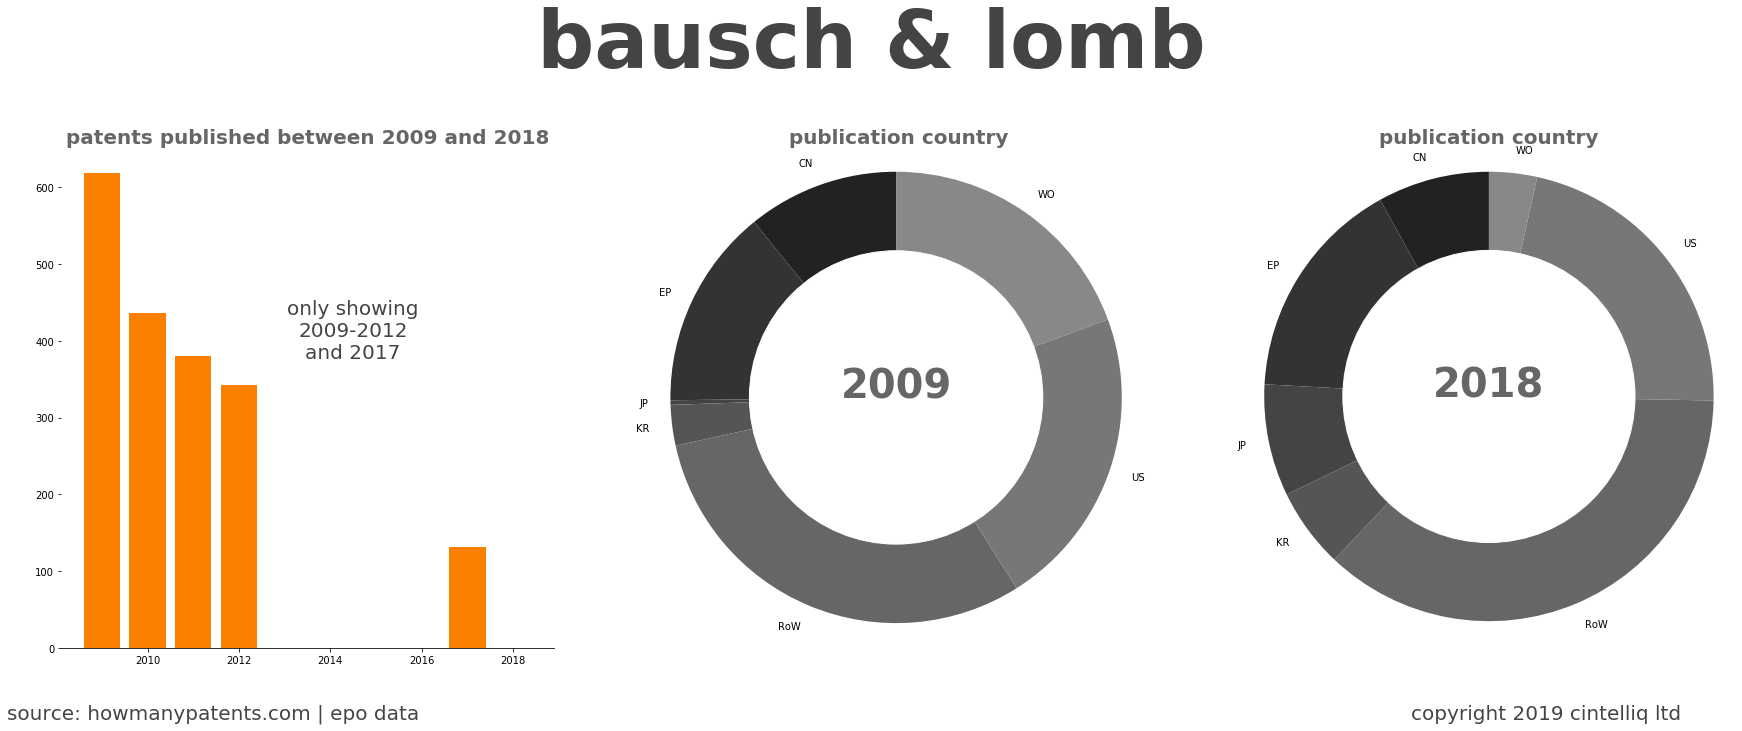 summary of patents for Bausch & Lomb